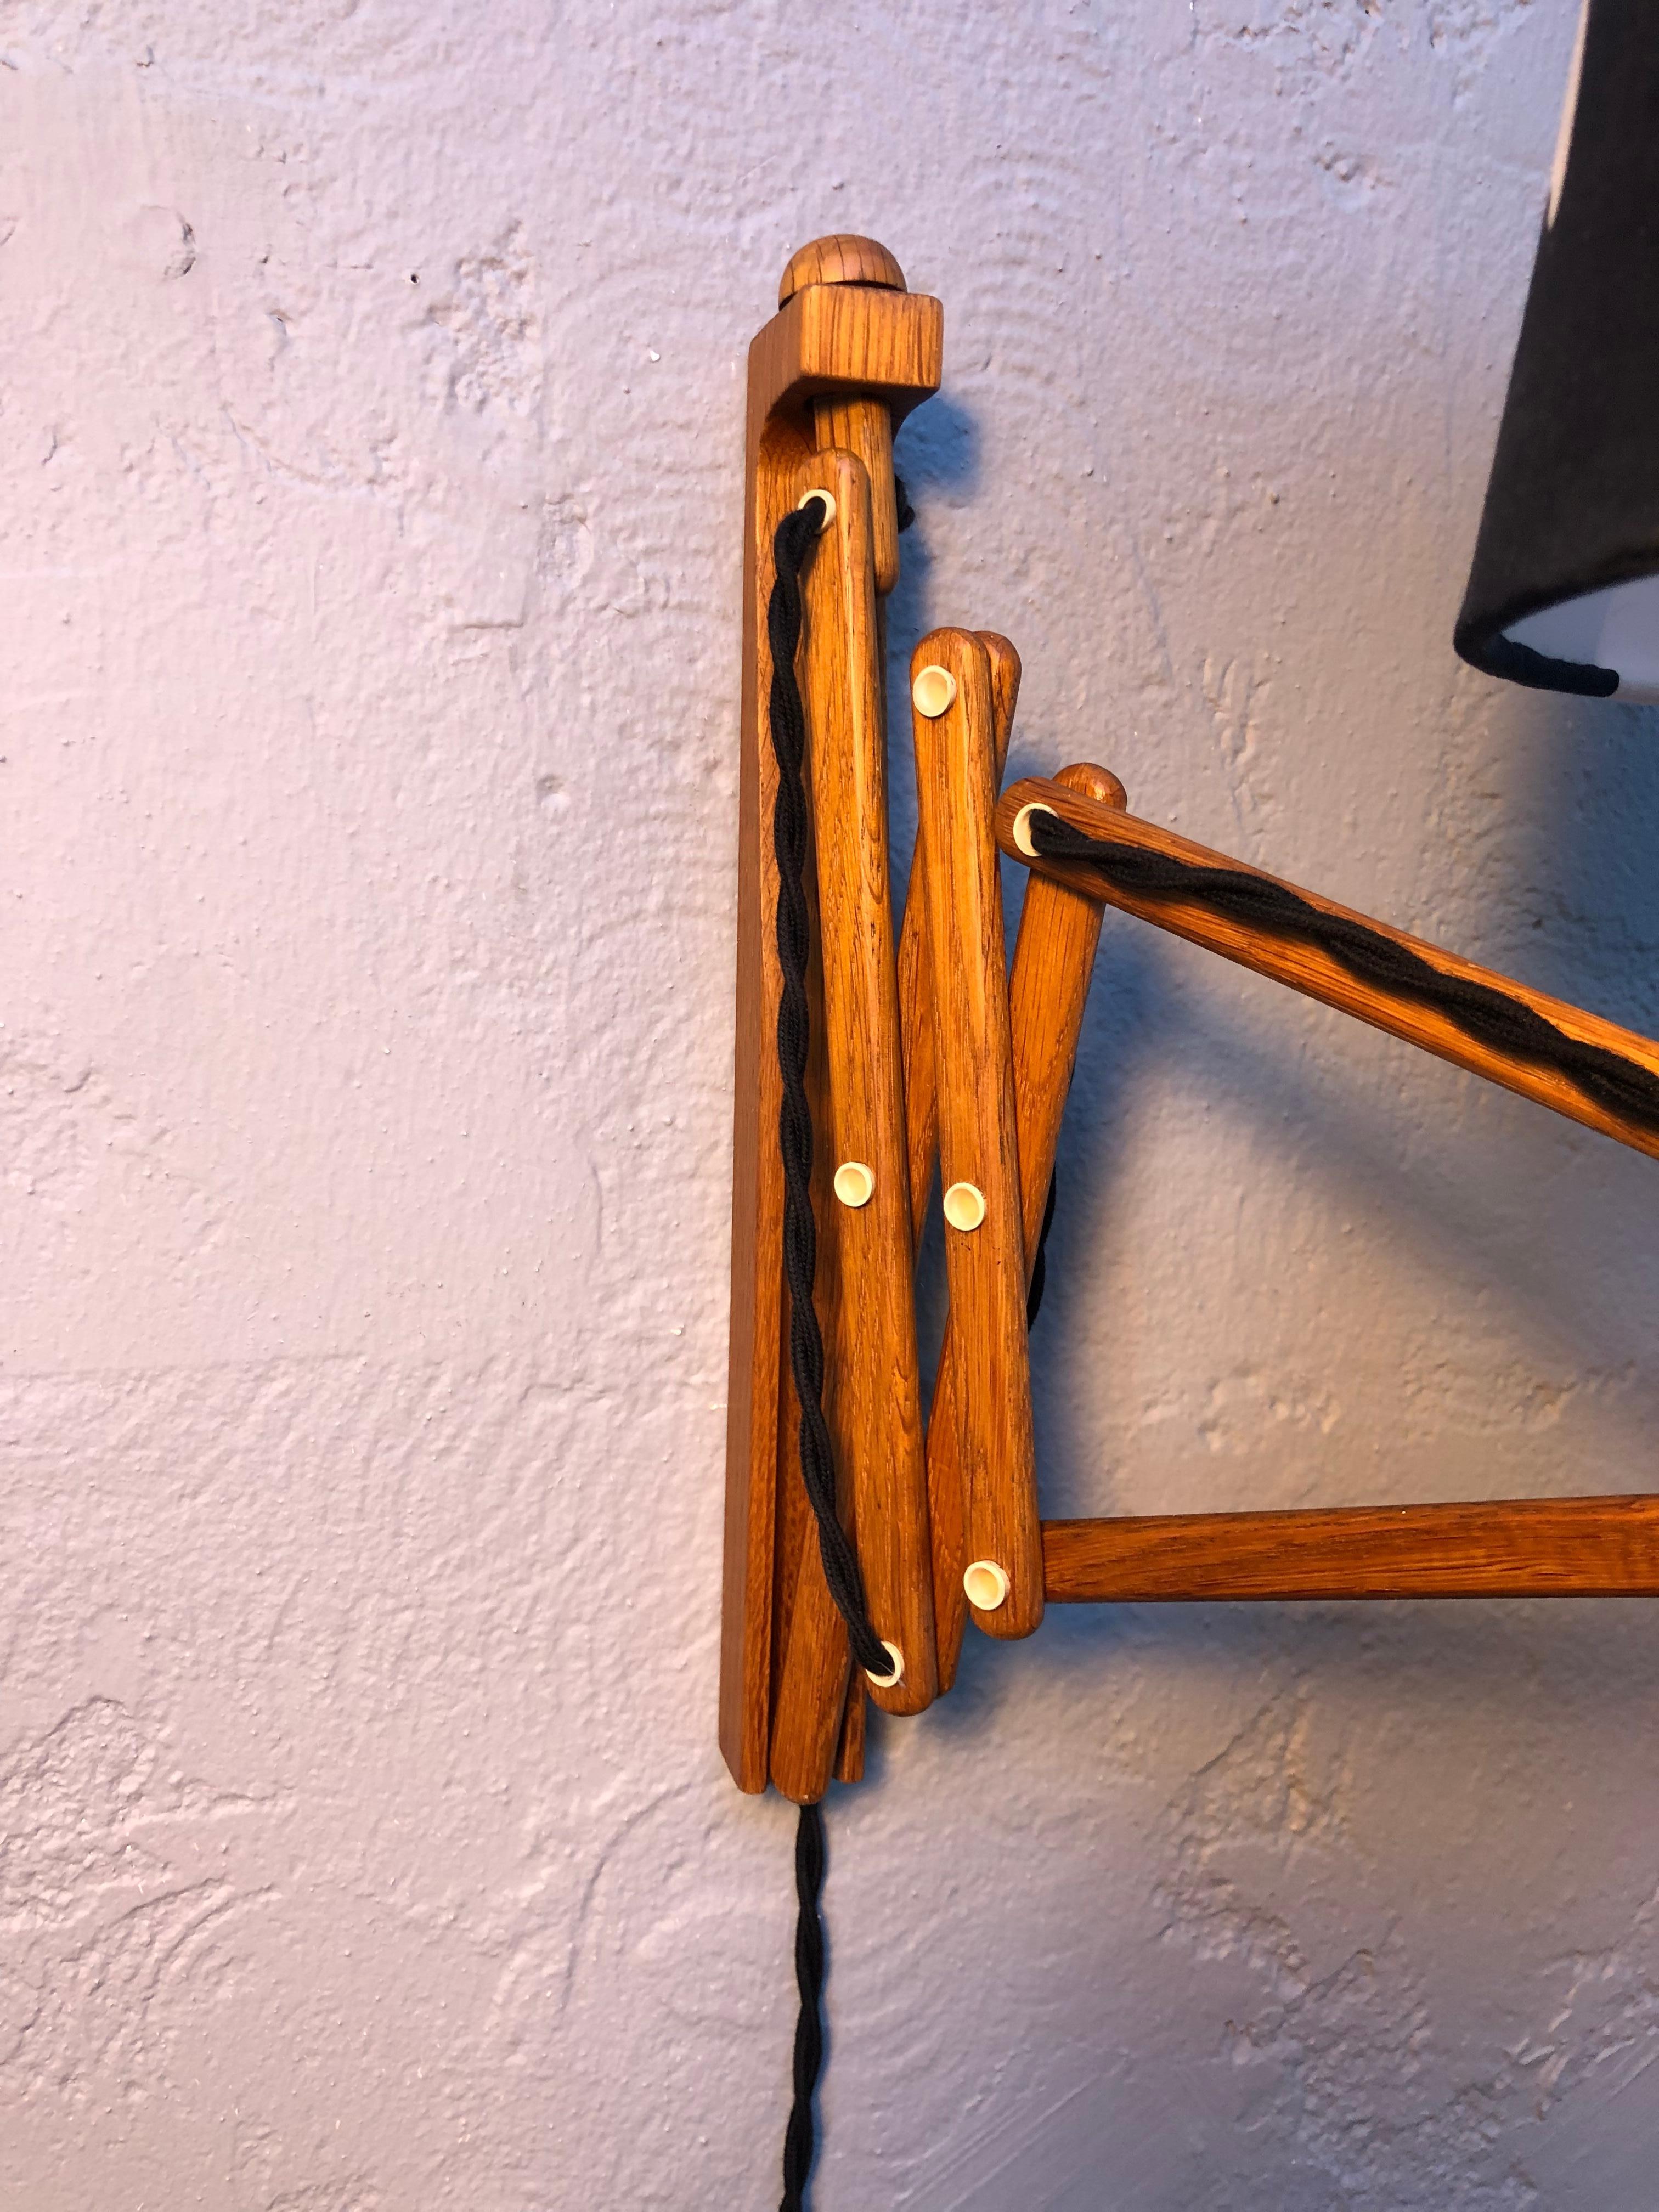 Iconic vintage Le Klint scissor lamp up light in oak from the late 1960s.
The oak has been lightly sanded and waxed without removing the beautiful dark patina to the wood. 
In great vintage condition with new black cloth twisted flex wiring and